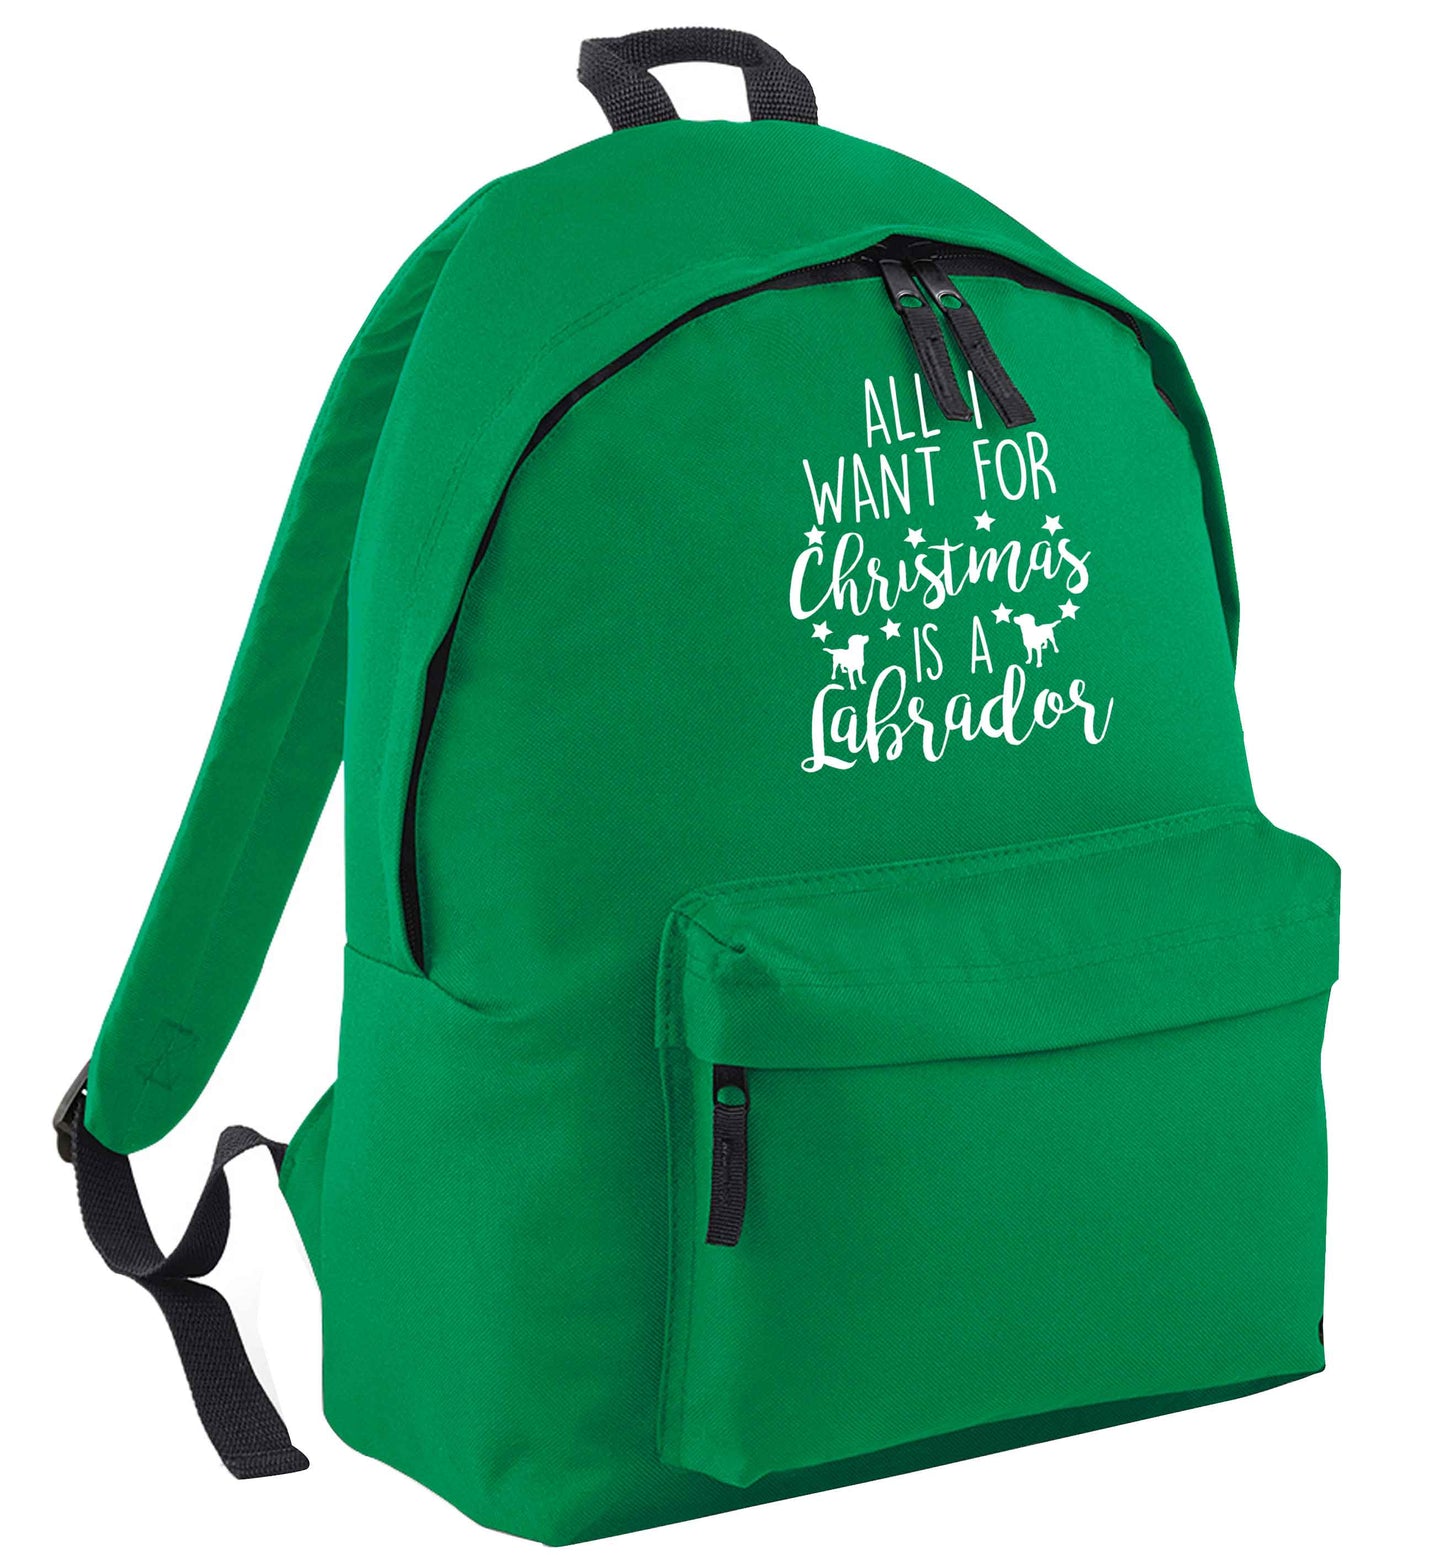 All I want for Christmas is a labrador green adults backpack